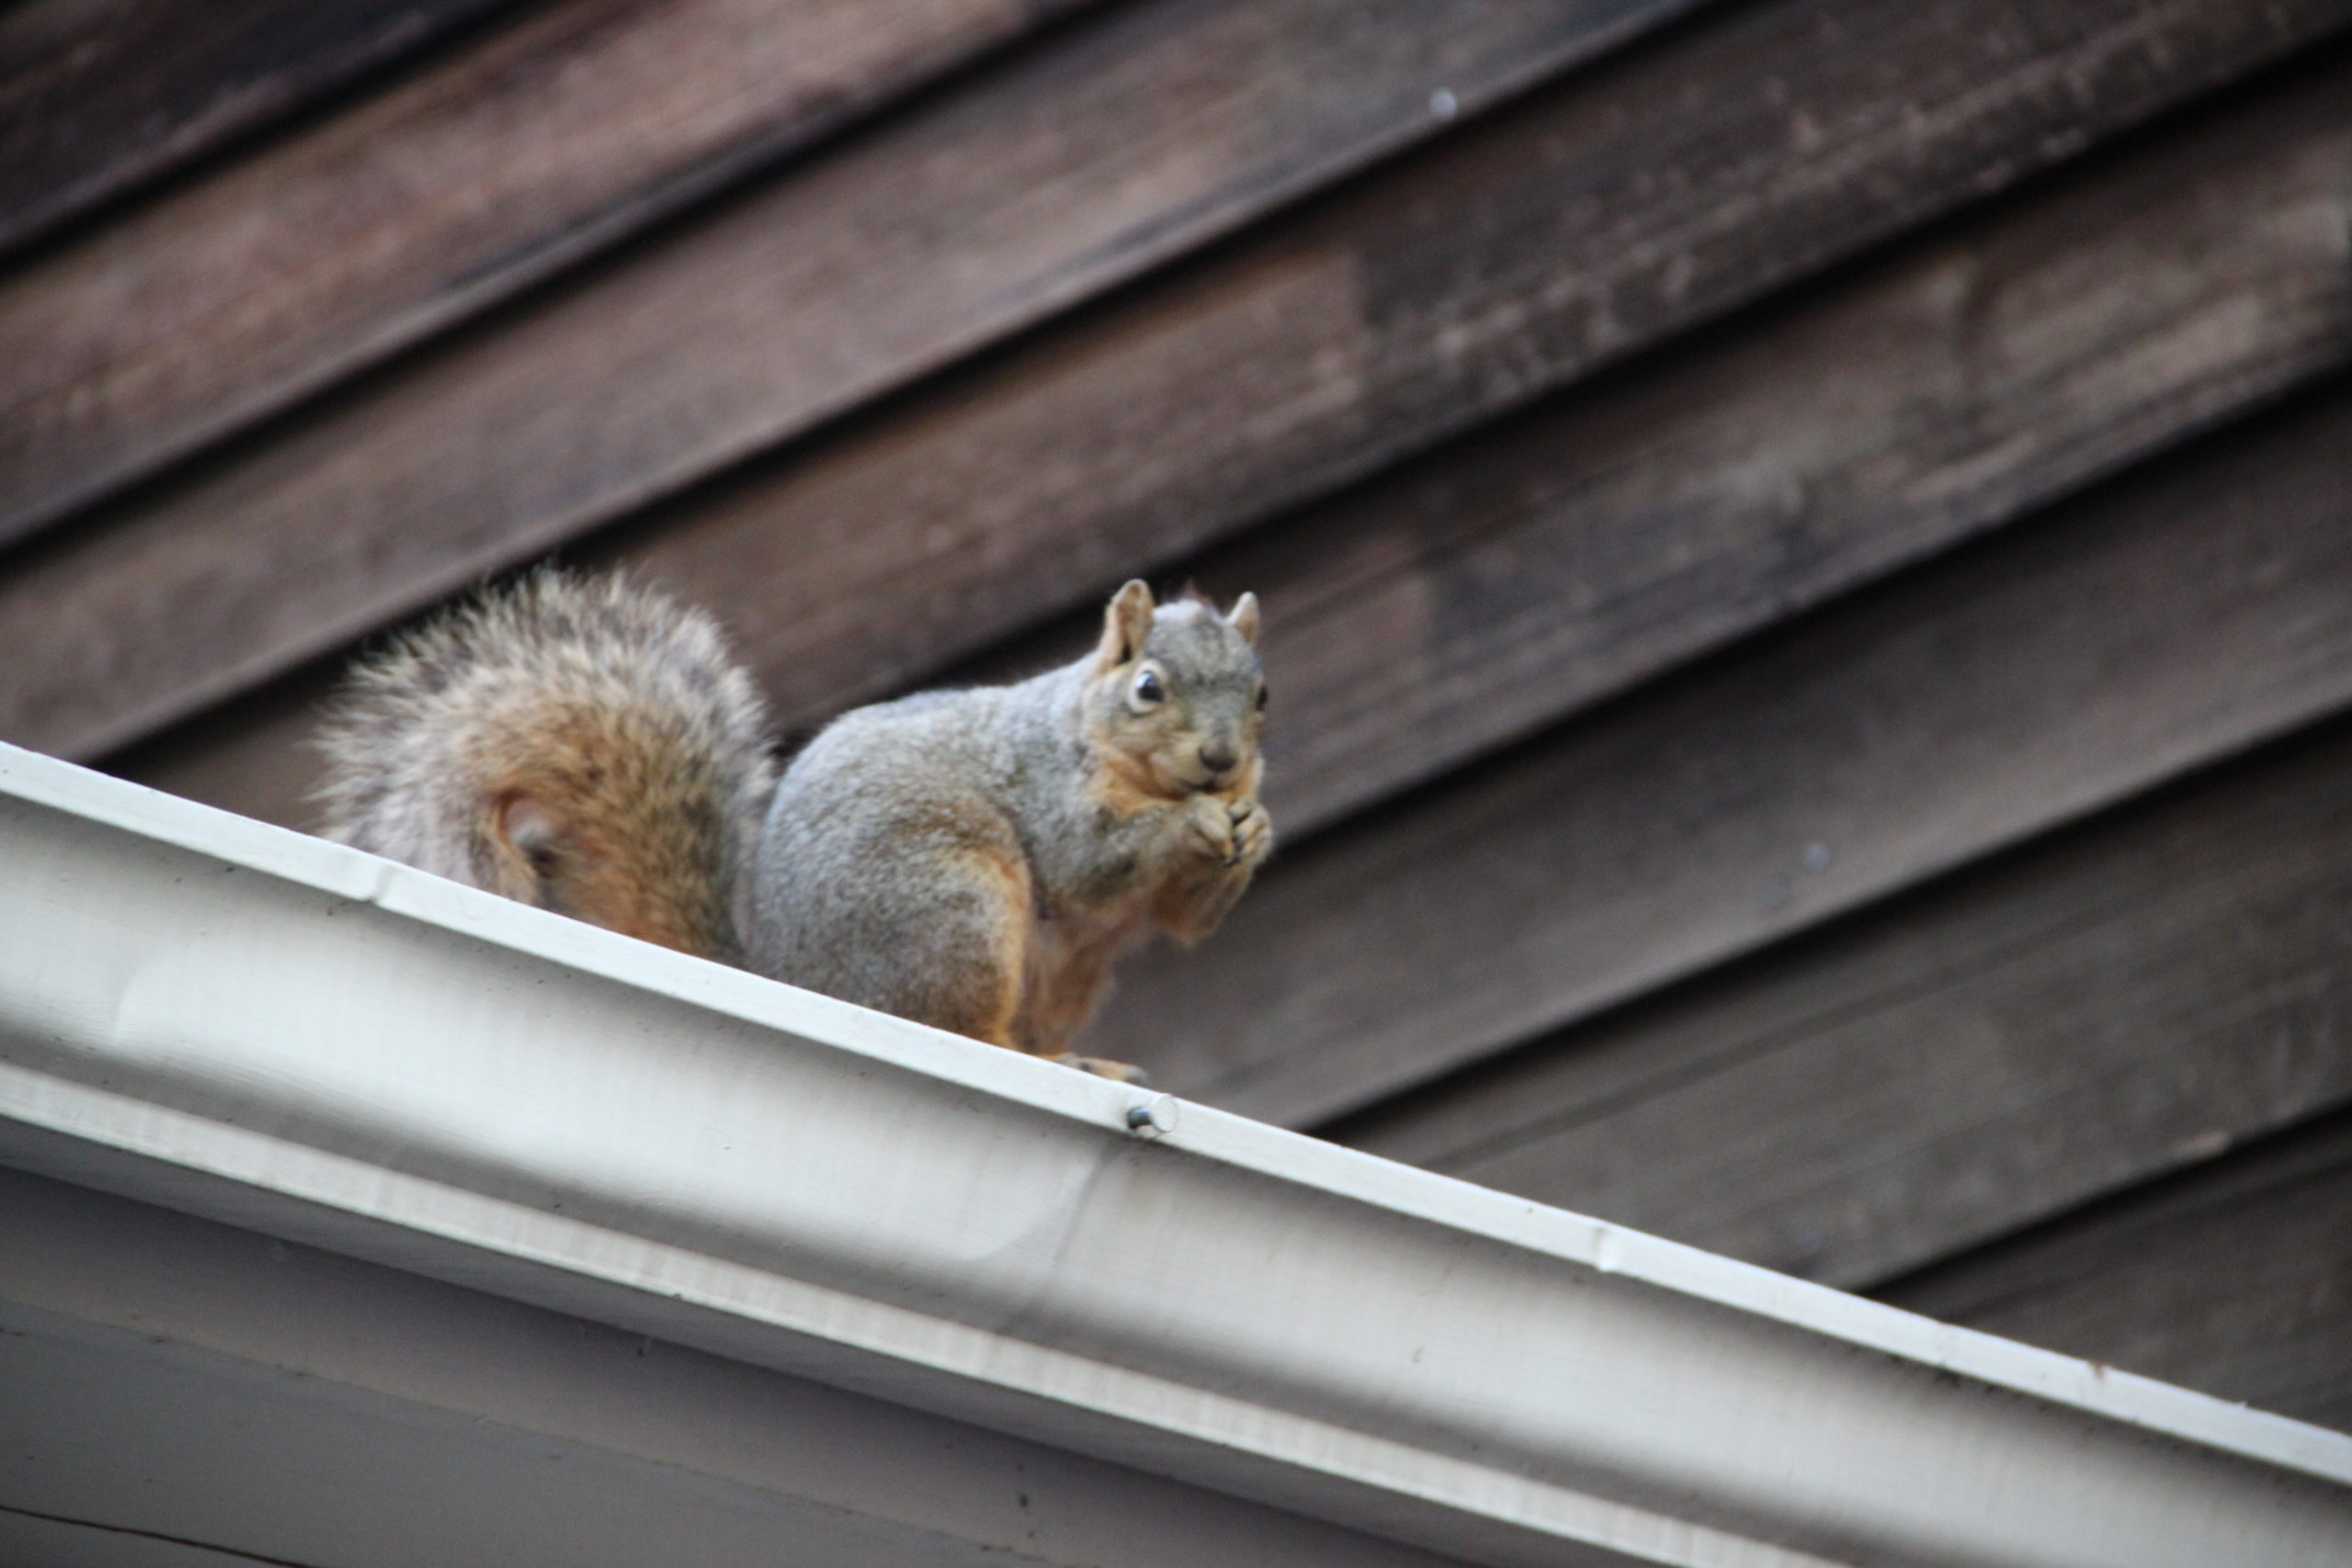 Do You Have Squirrels In The Attic?